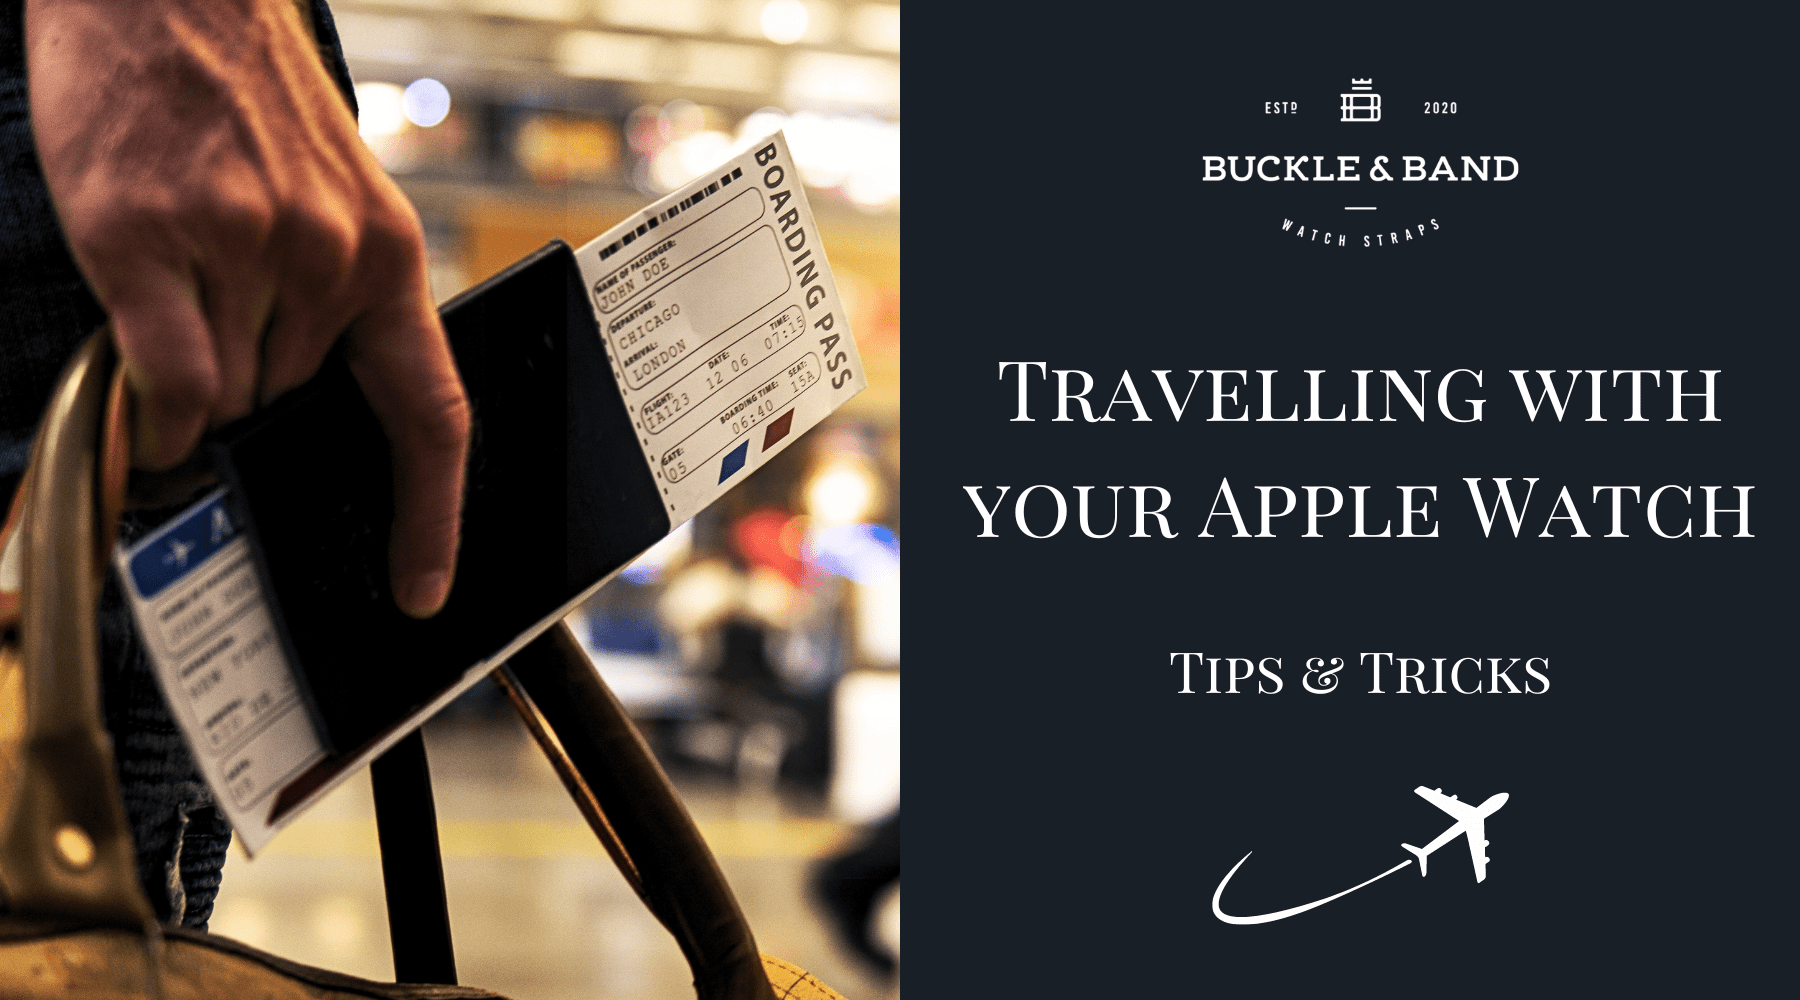 Travelling with your Apple Watch: Tips & Tricks - Buckle and Band